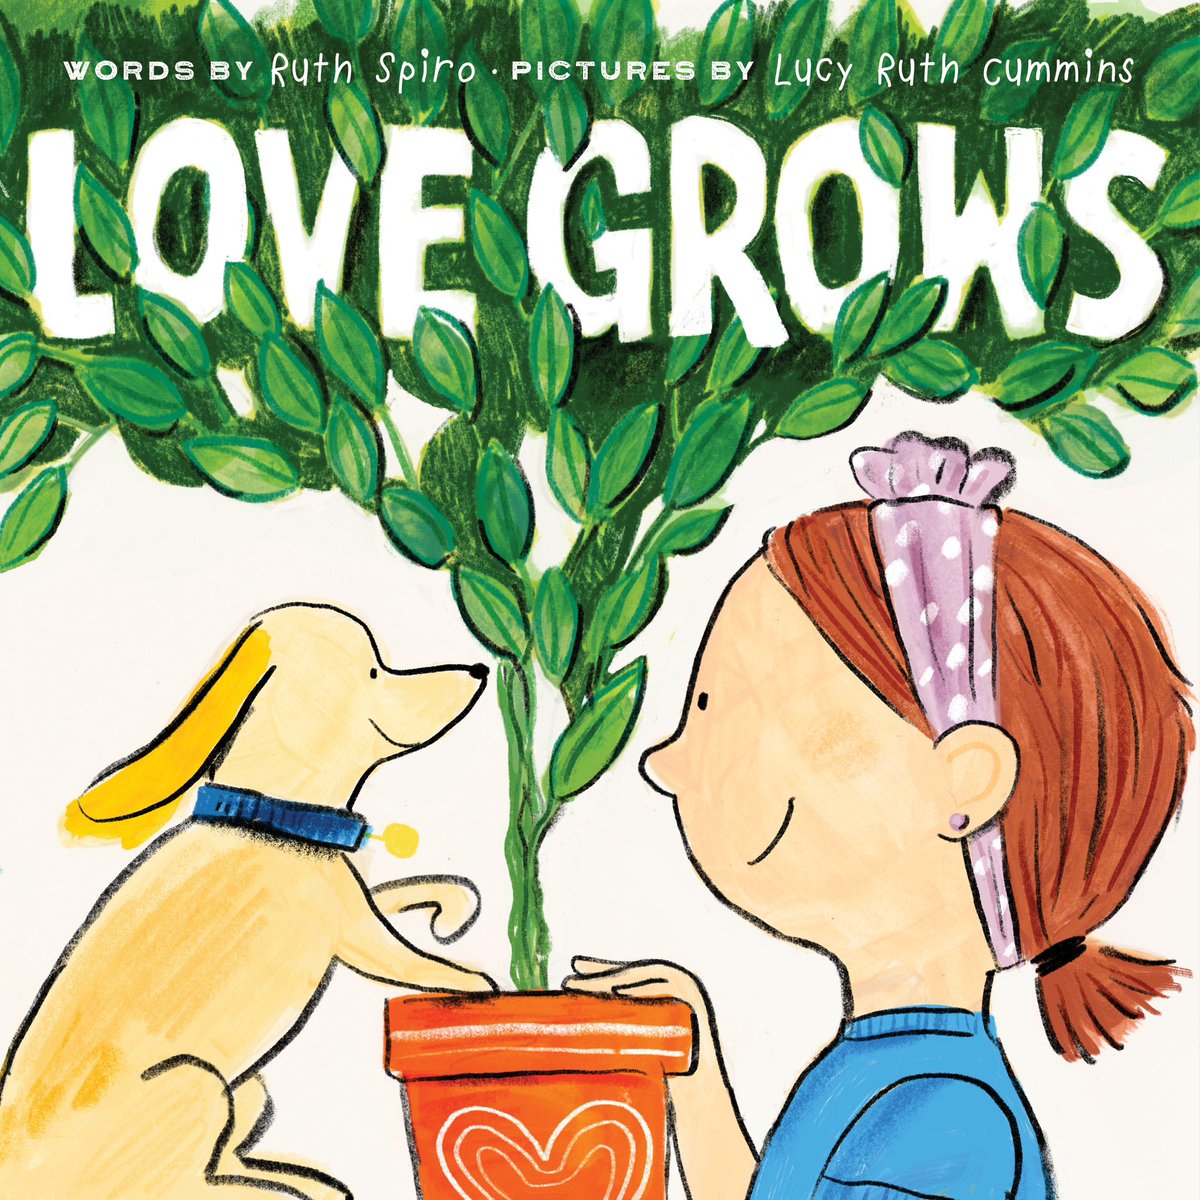 It’s COVER REVEAL DAY! How sweet is this cover by @lucyruth Cummins?!! This special book comes out in December and is available for pre-order now! Thanks to the team at HarperCollins!! 🌱❤️🌱 #LITapalooza #picturebook #CoverReveal #plantfam